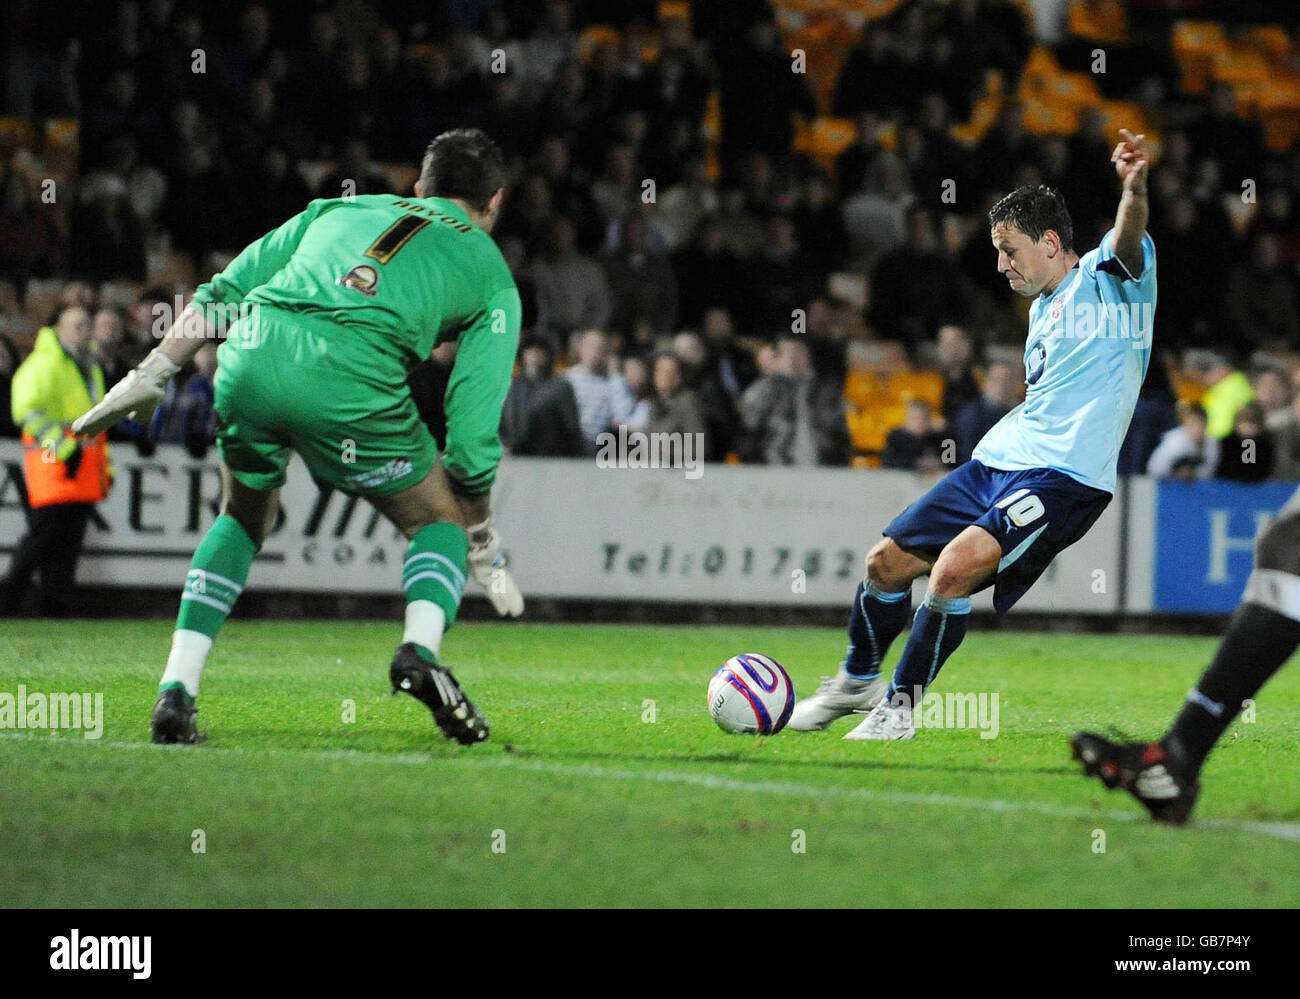 Brentford's Charlie MacDonald (right) scores during the Coca-Cola Football League Two match at Vale Park, Port Vale. Stock Photo